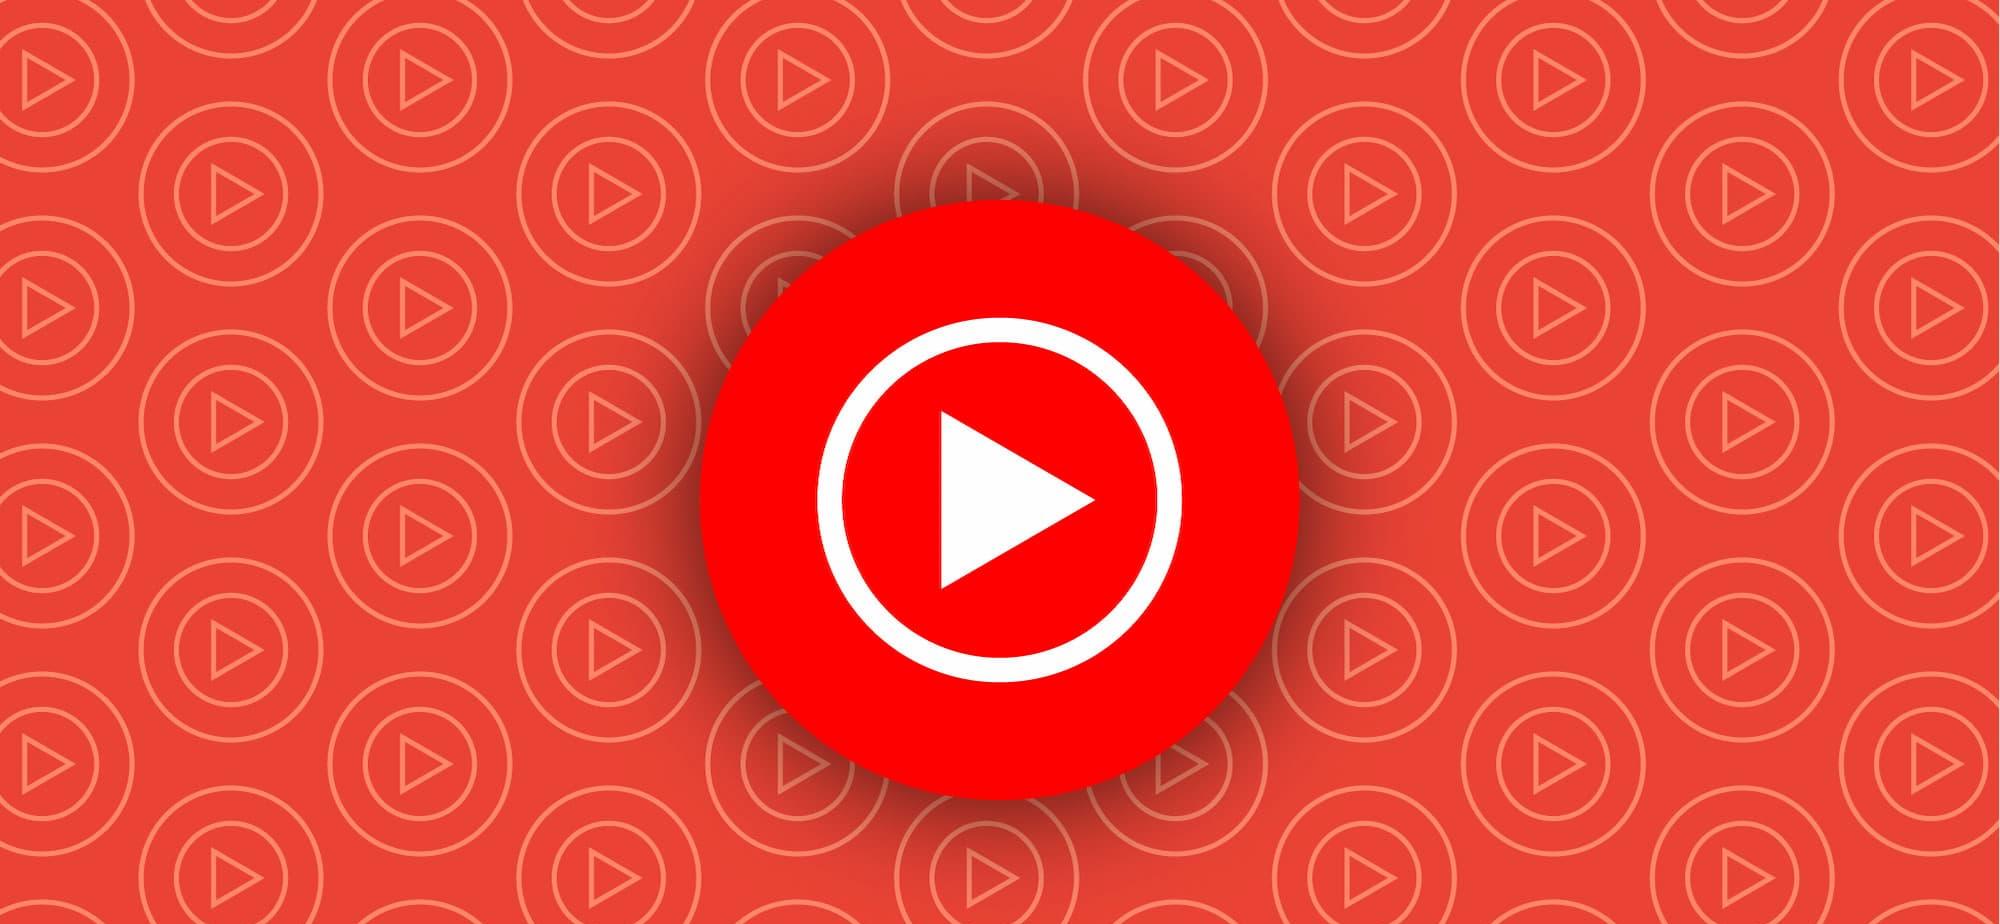 YouTube Music Homescreen Recommendations: A Temporary Glitch